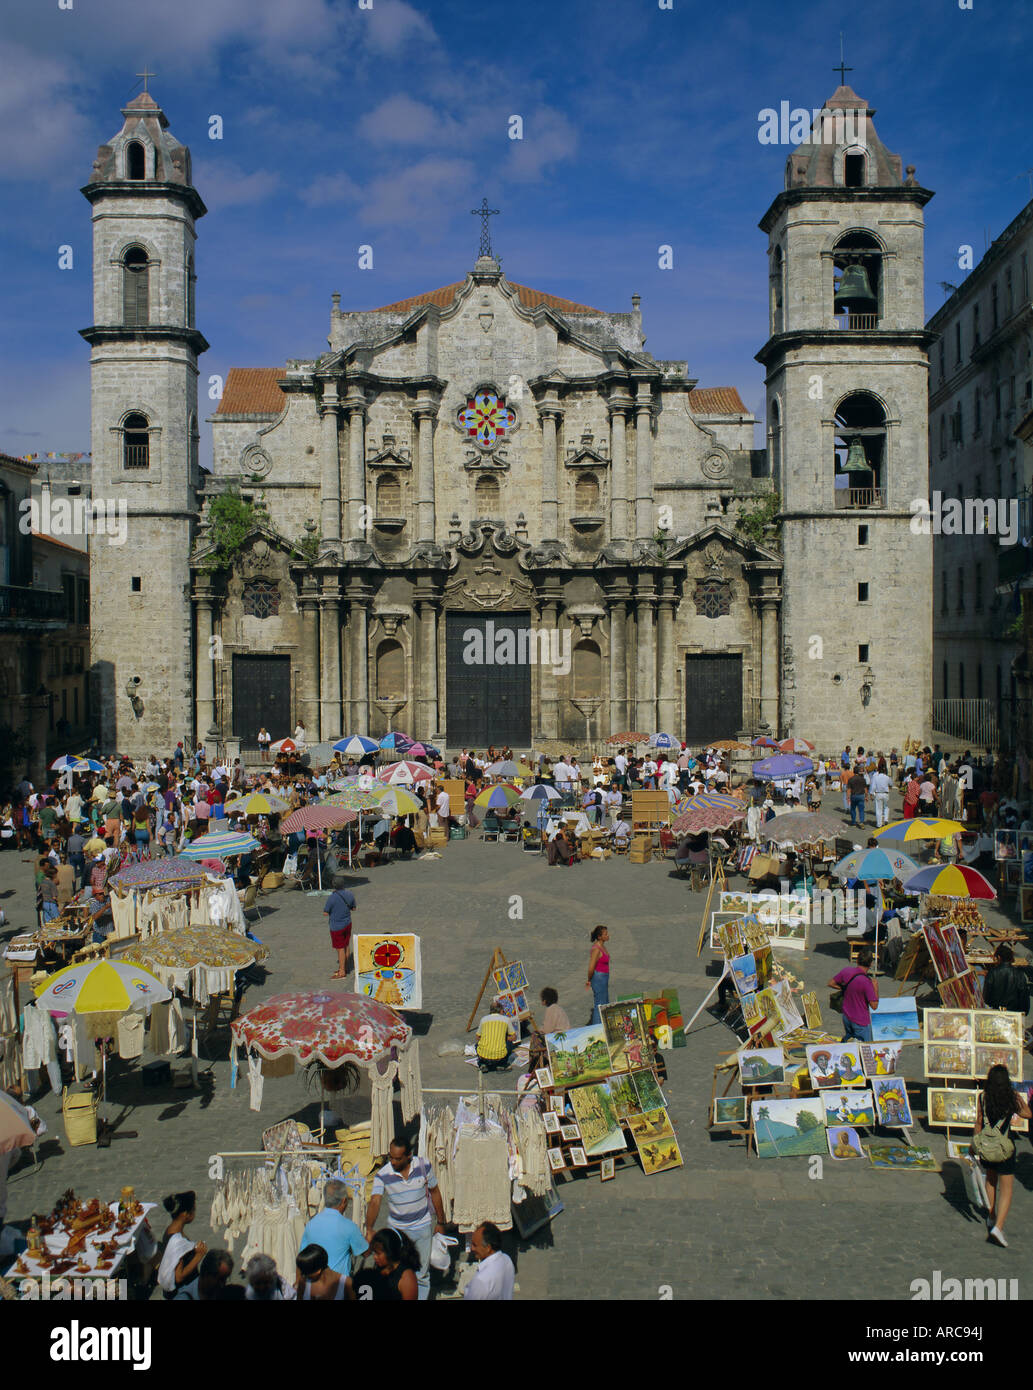 Cathedral, Plaza and market, Havana, Cuba, West Indies, Central America Stock Photo